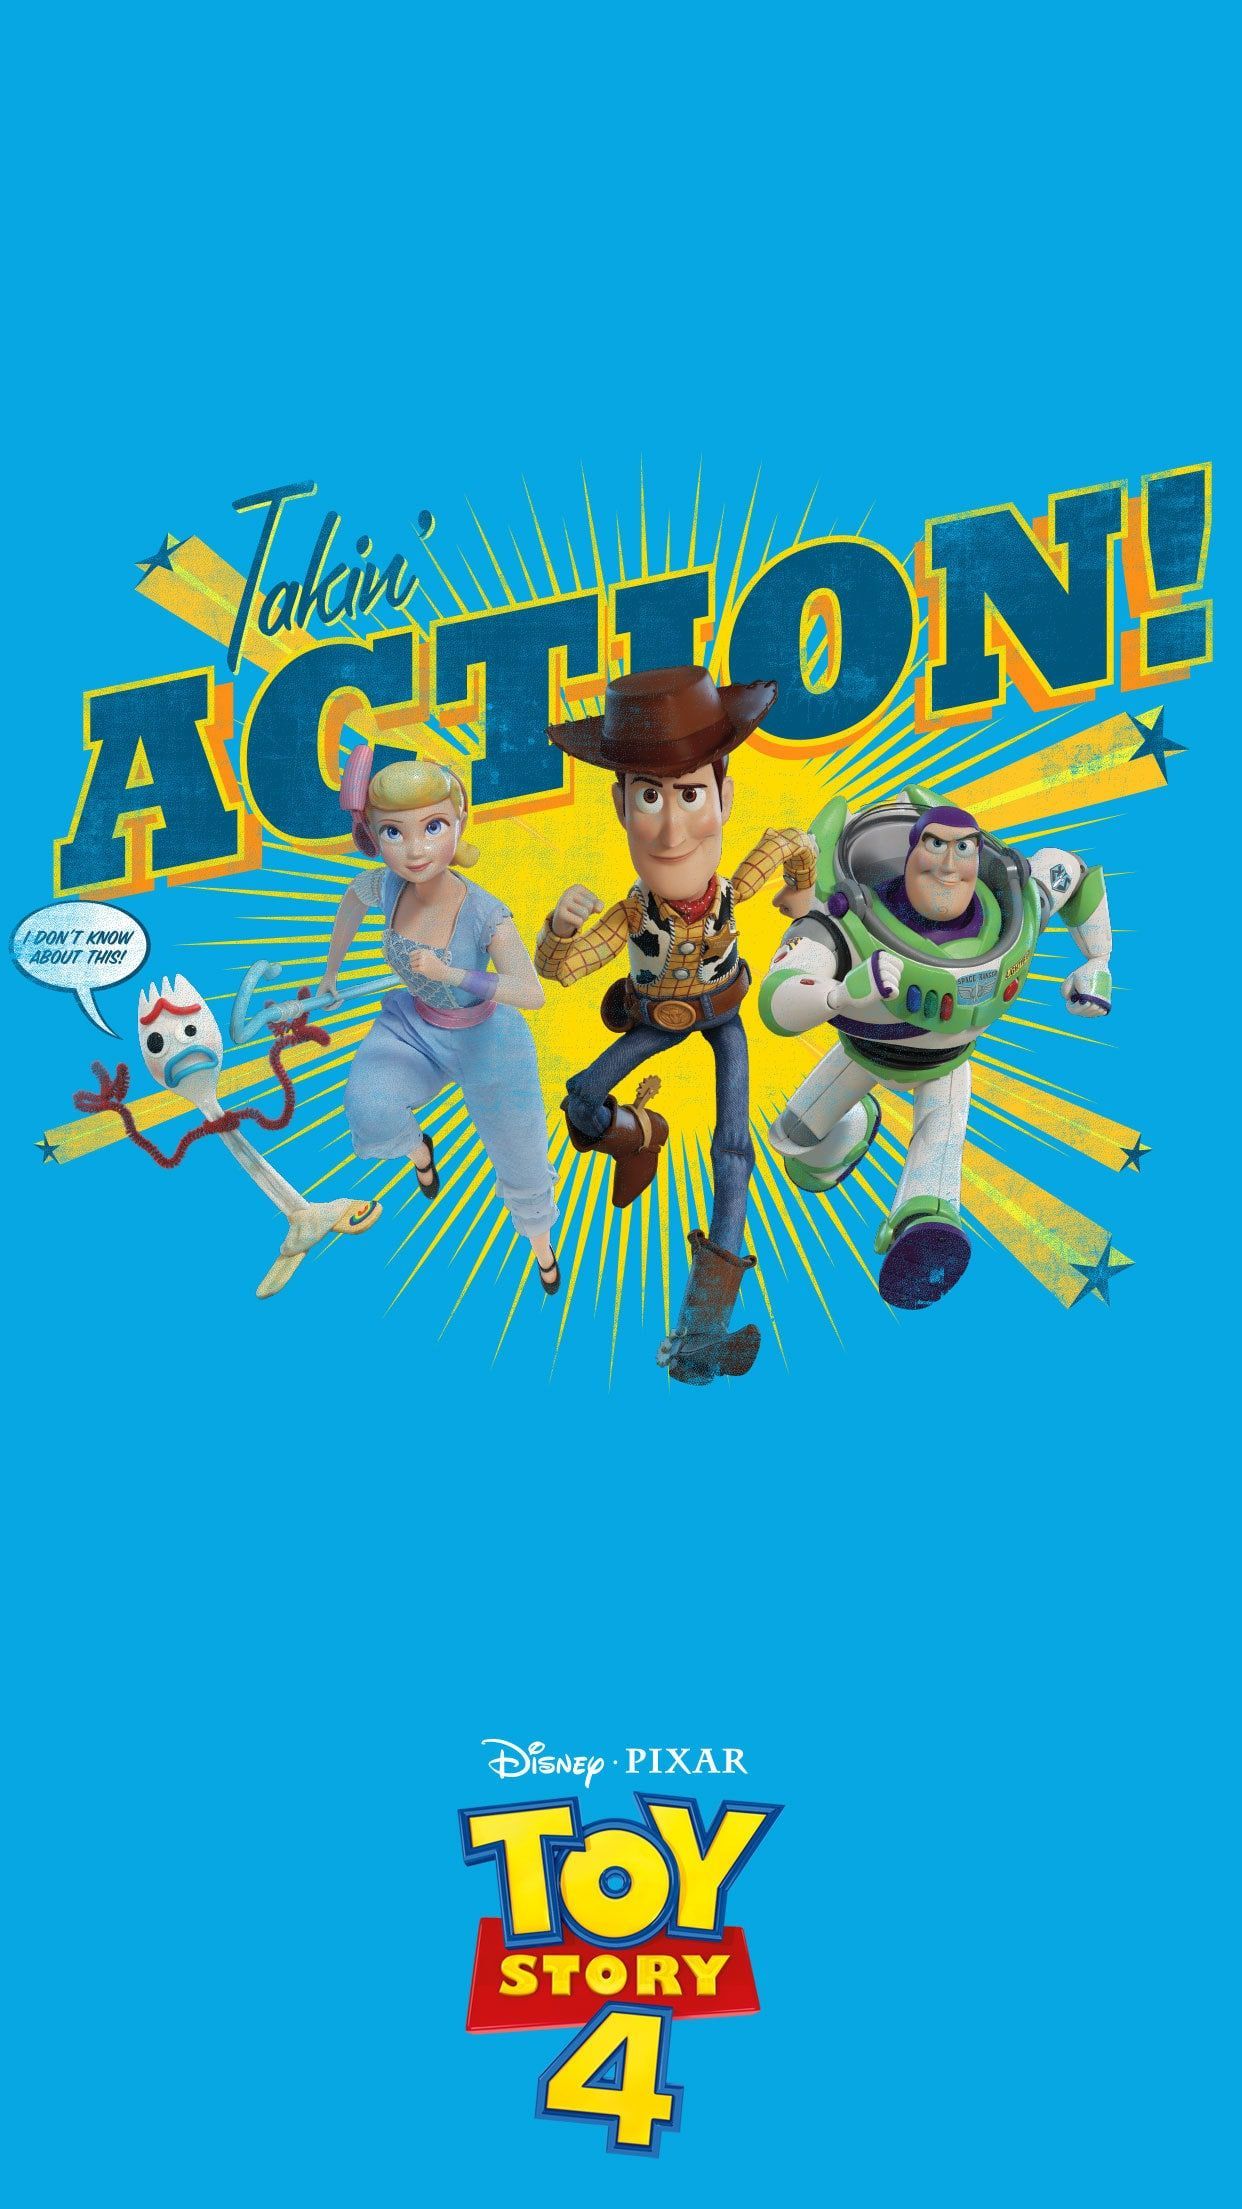 Go To Infinity And Beyond With These Disney and Pixar Toy Story 4